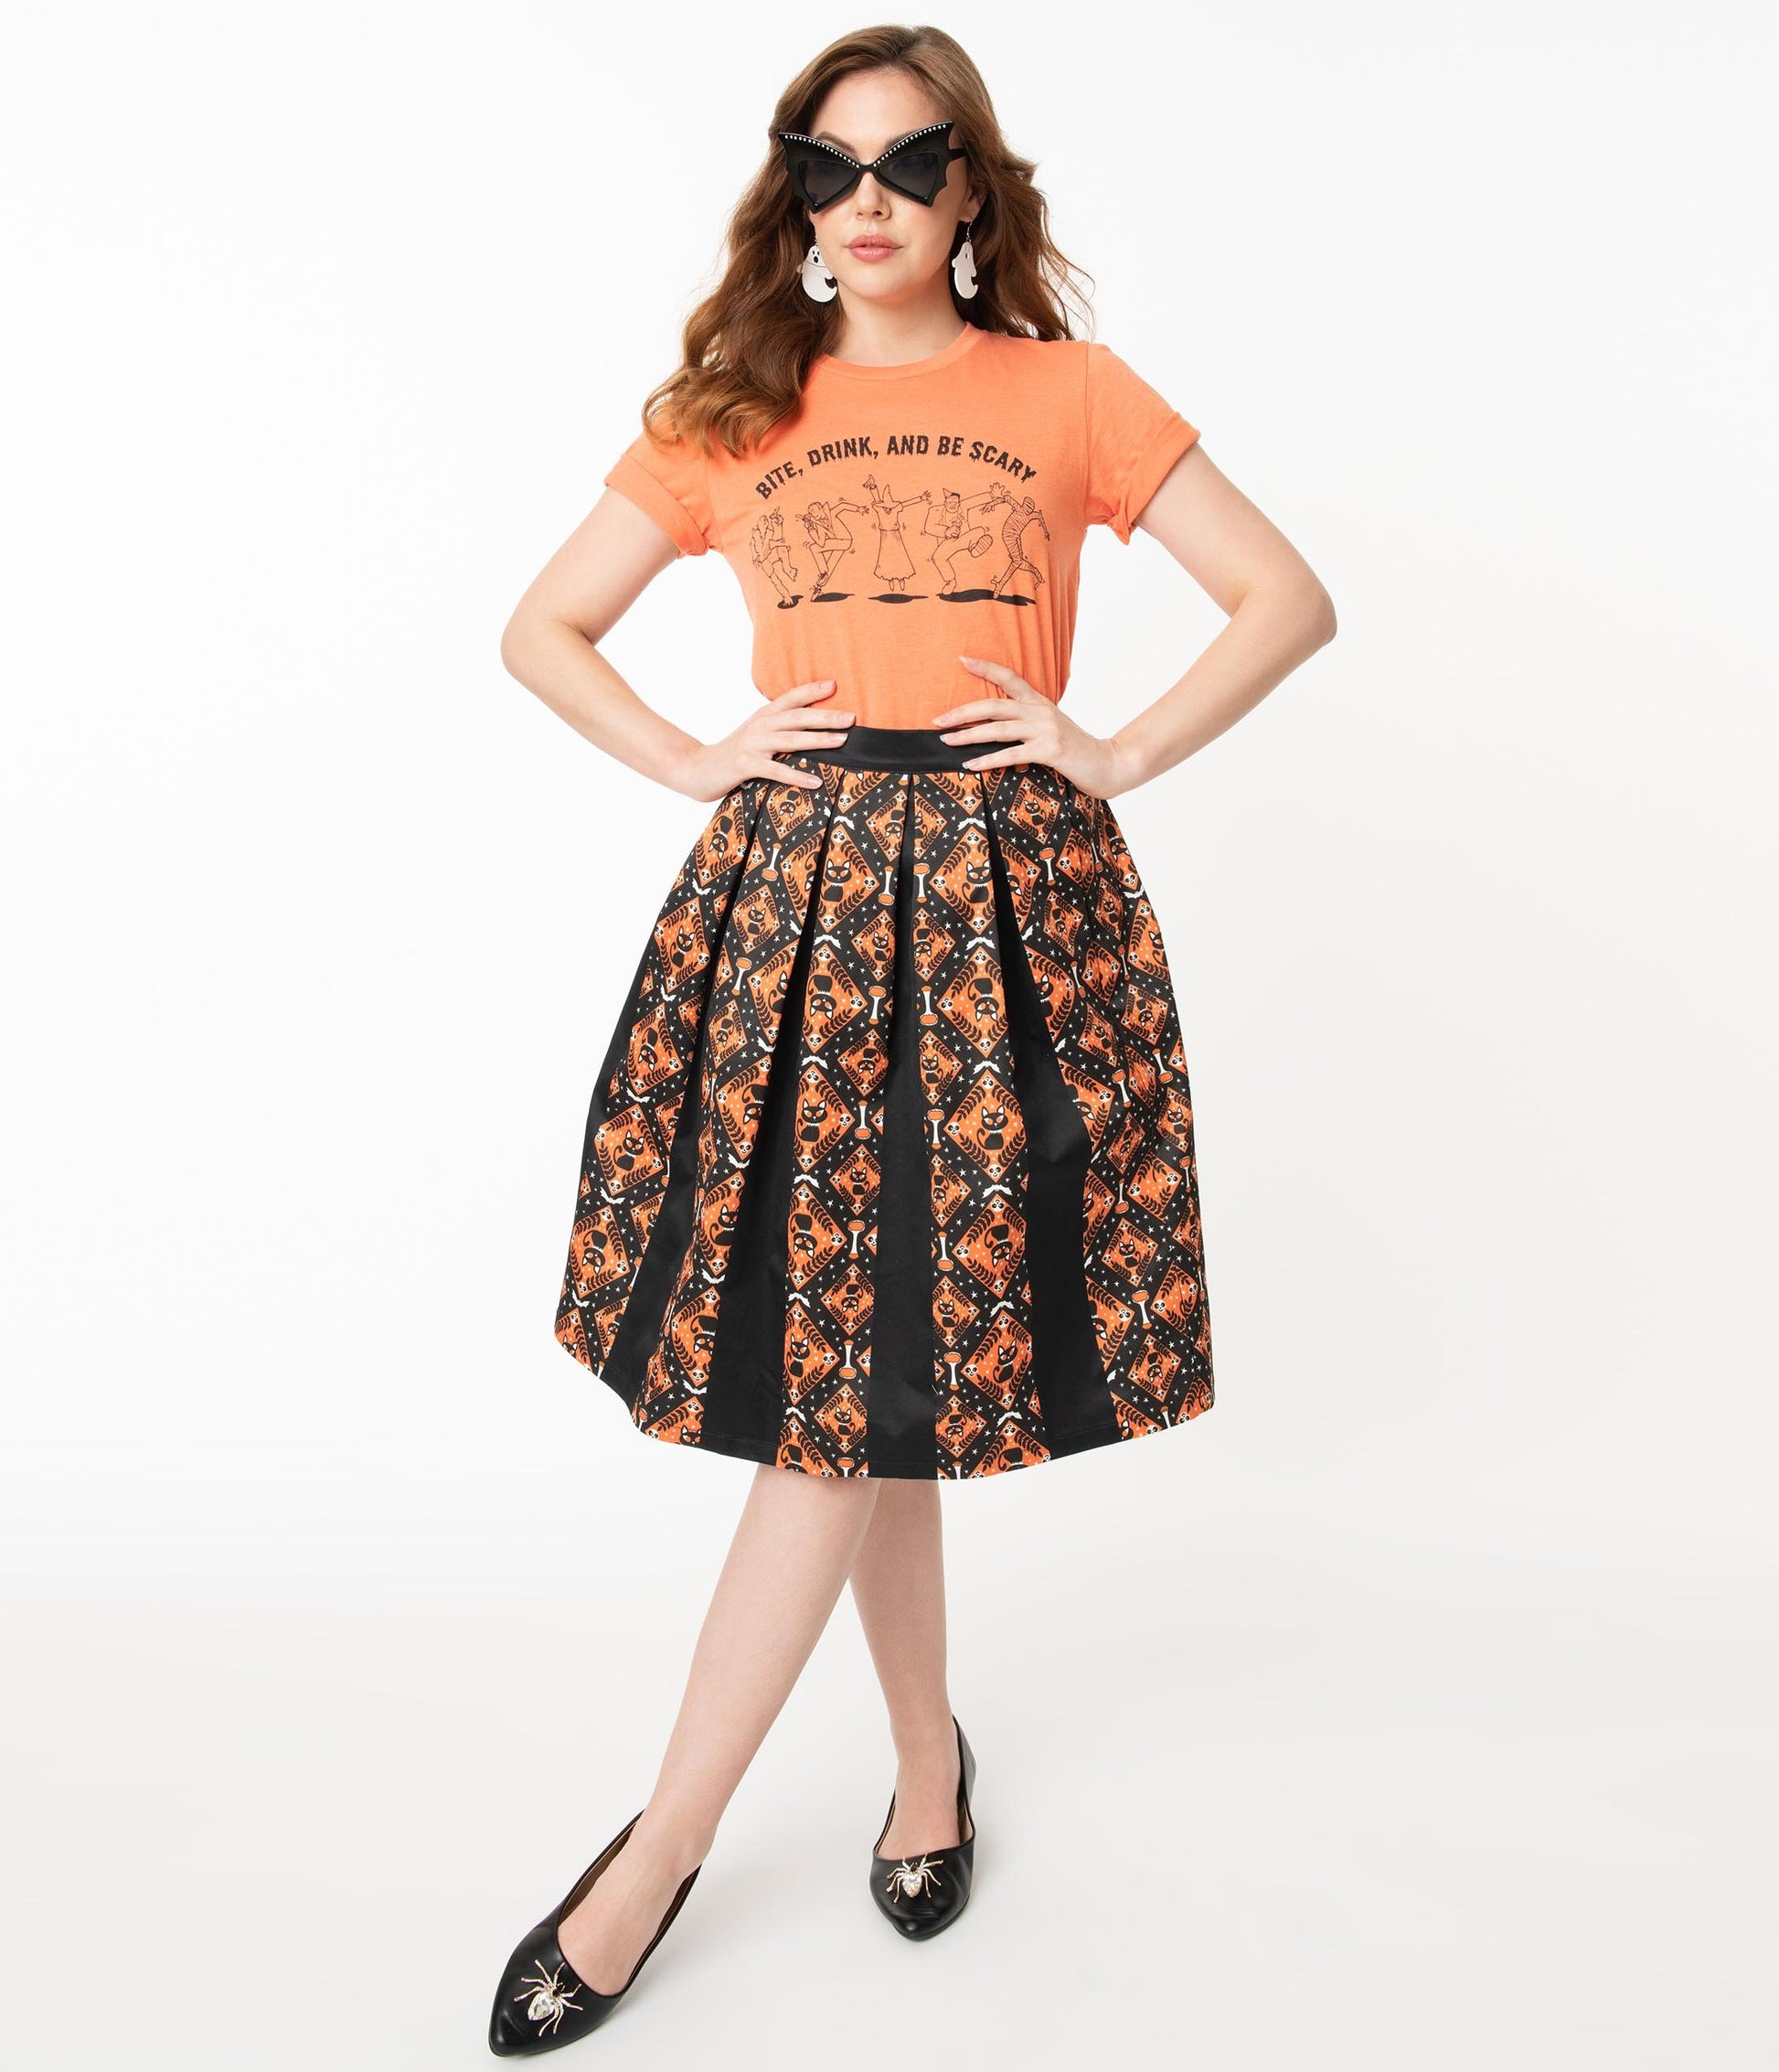 This is a Unique Vintage Halloween swing skirt that has black cats, bats and skulls with orange print and the model is wearing an orange shirt and sunglasses.